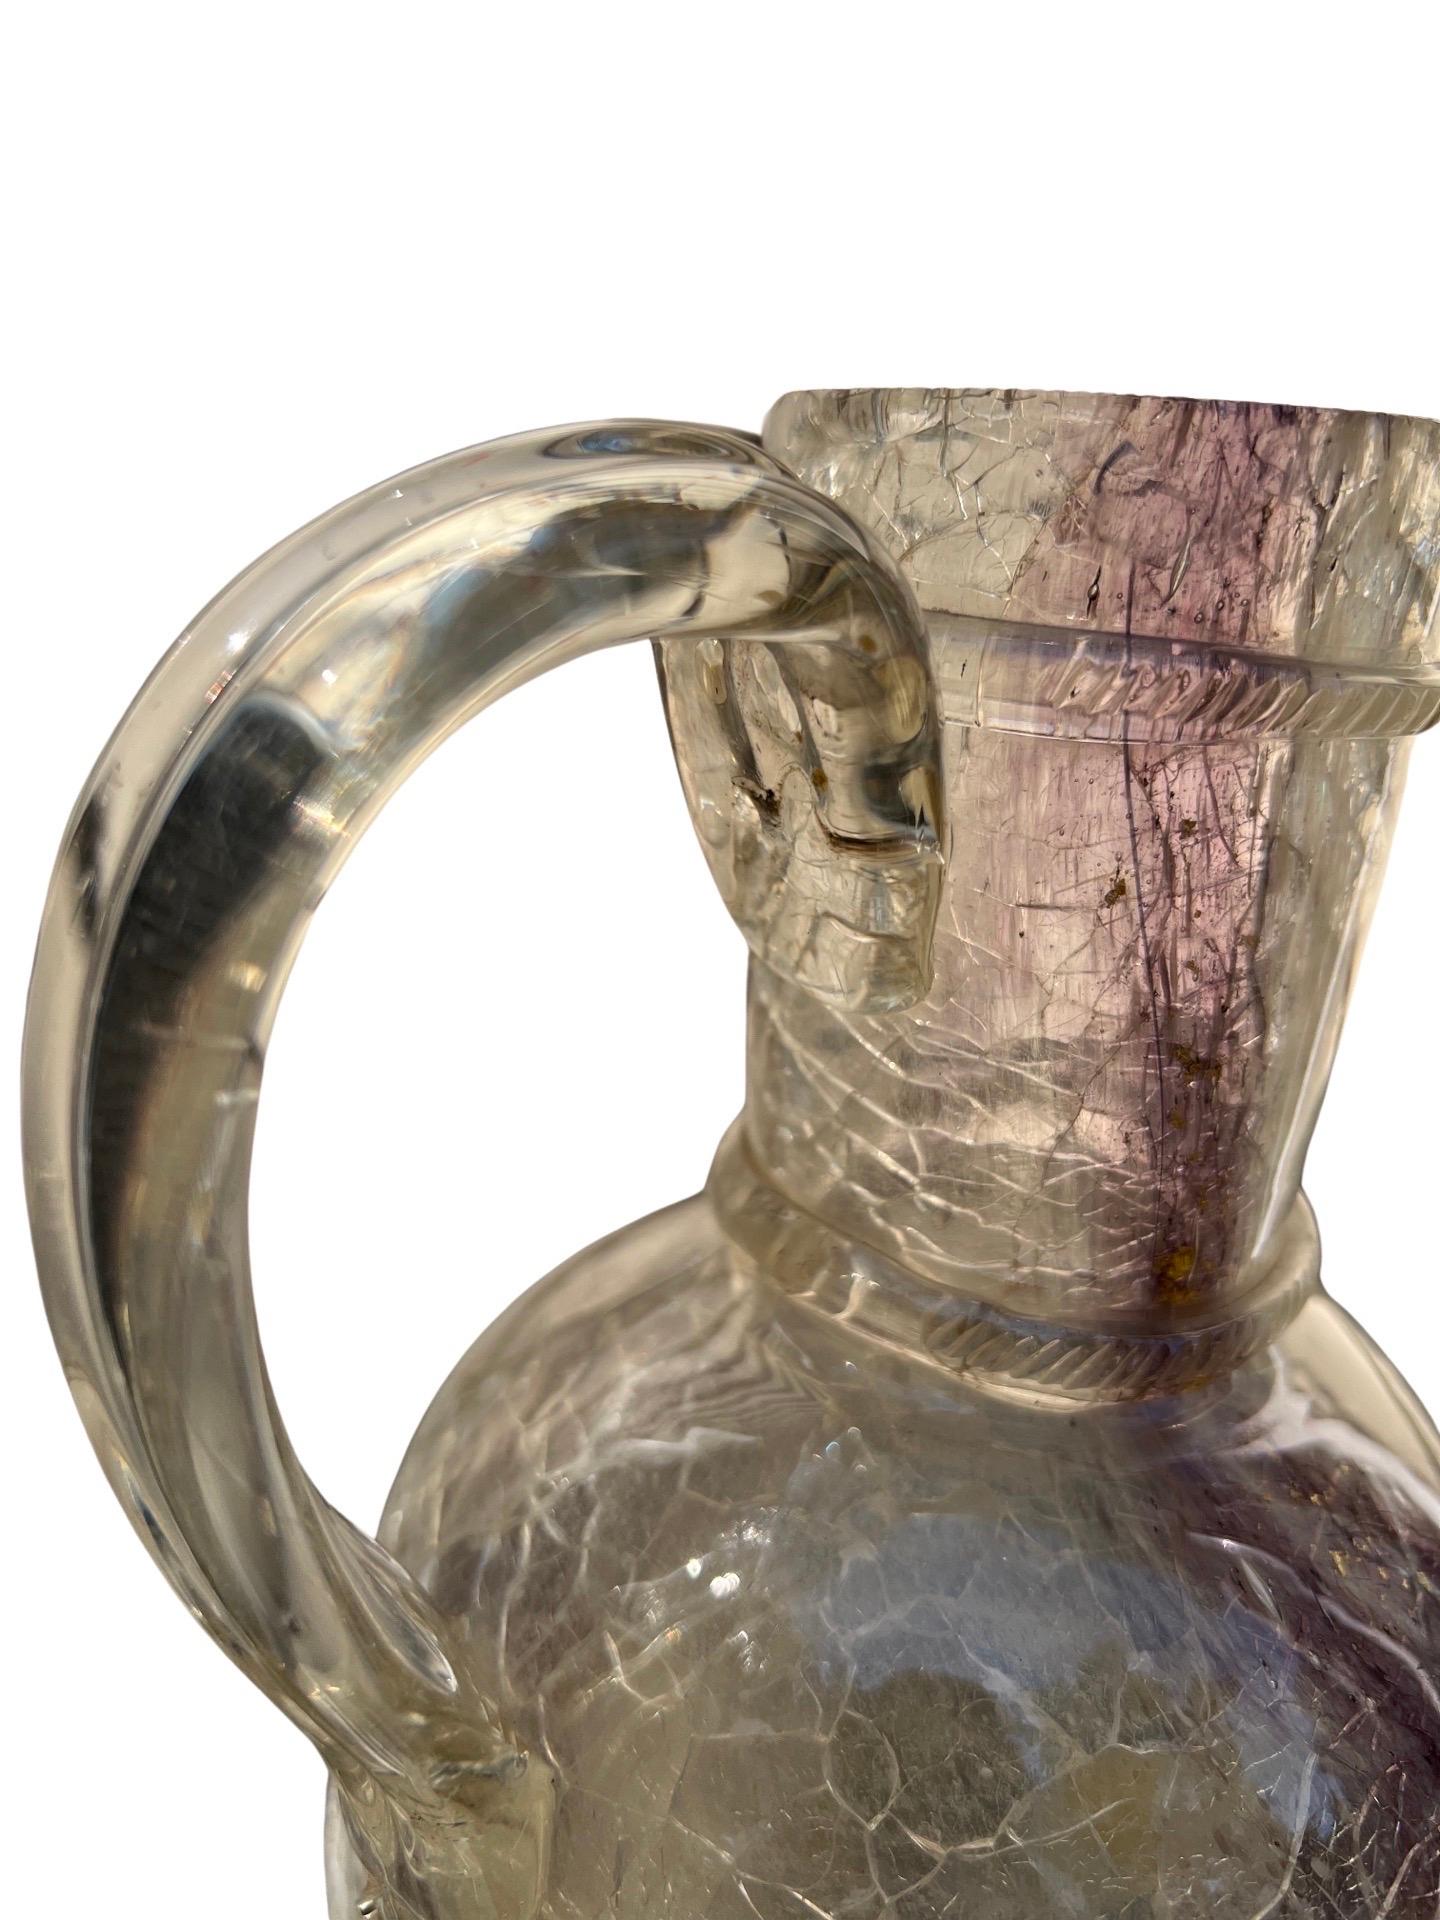 After The Roman Antique - Rock Crystal, Glass & Gold Flecking Grand Tour Pitcher For Sale 11